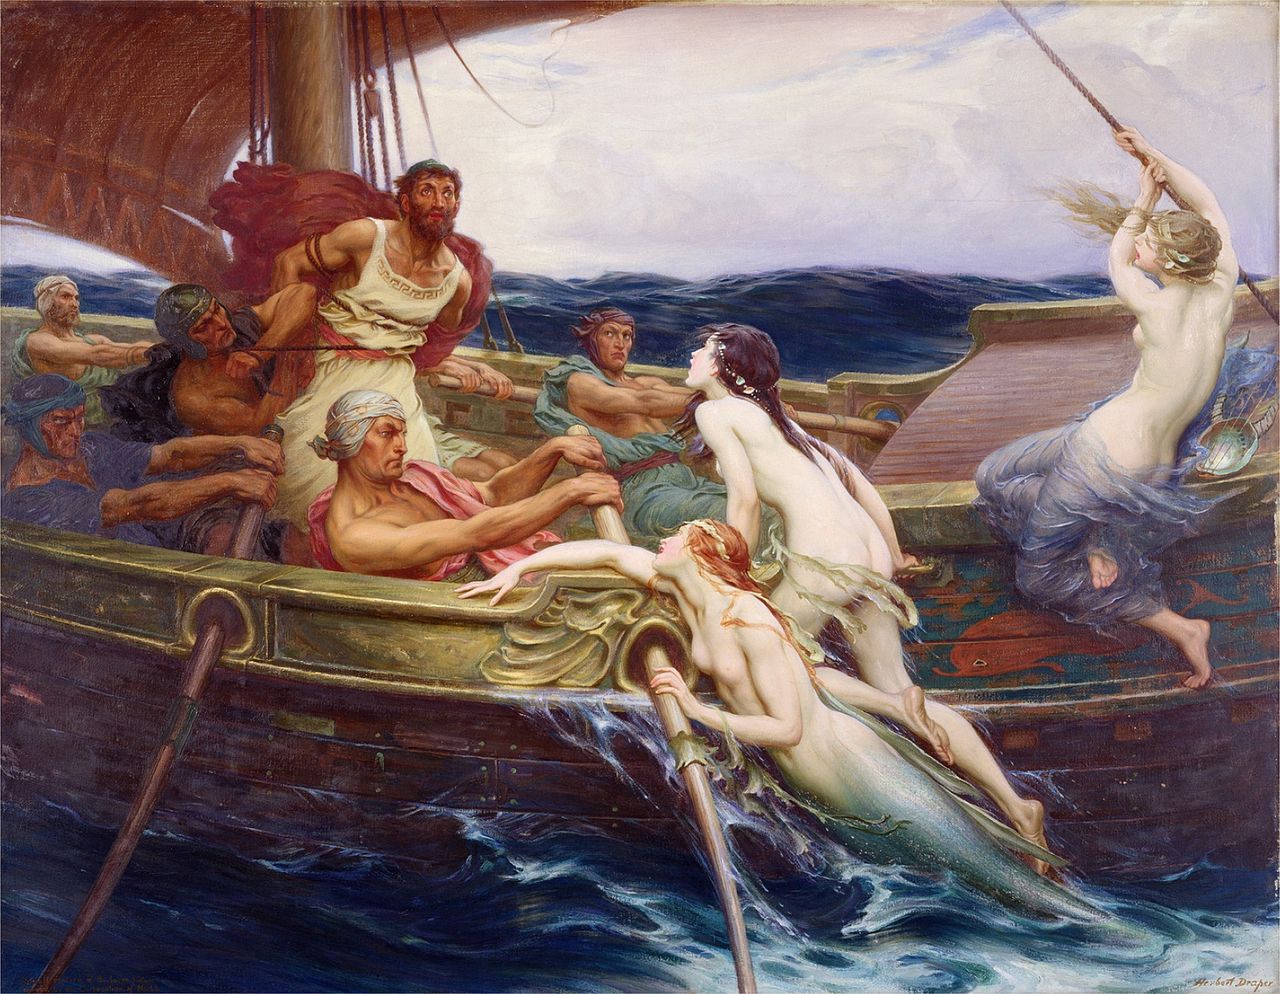 1280px-Ulysses_and_the_Sirens_1910.jpg